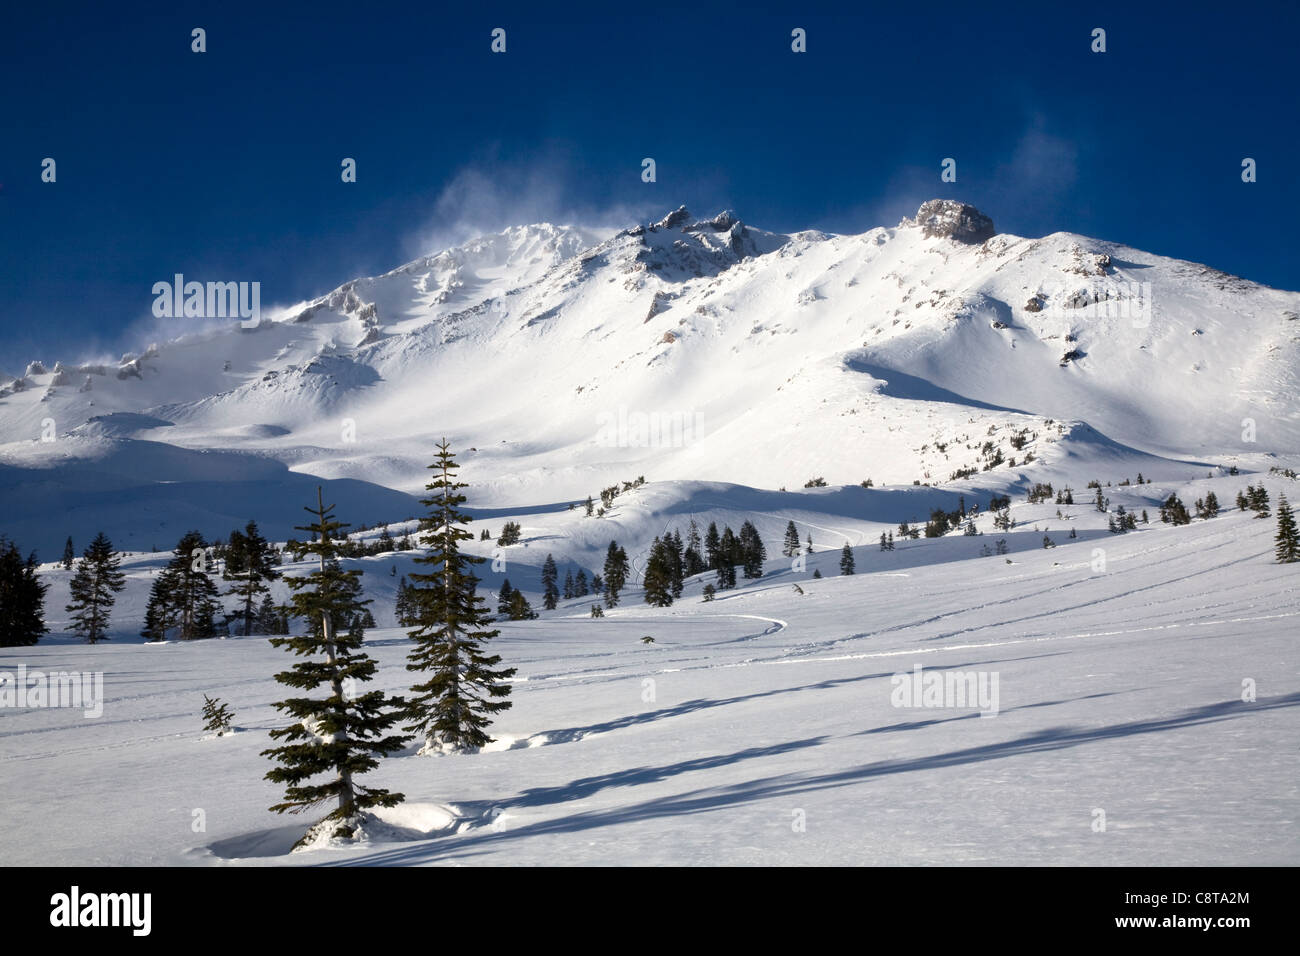 CA01075-00...CALIFORNIA - Mount Shasta from the Bunny Flats area in Shasta National Forest. Stock Photo